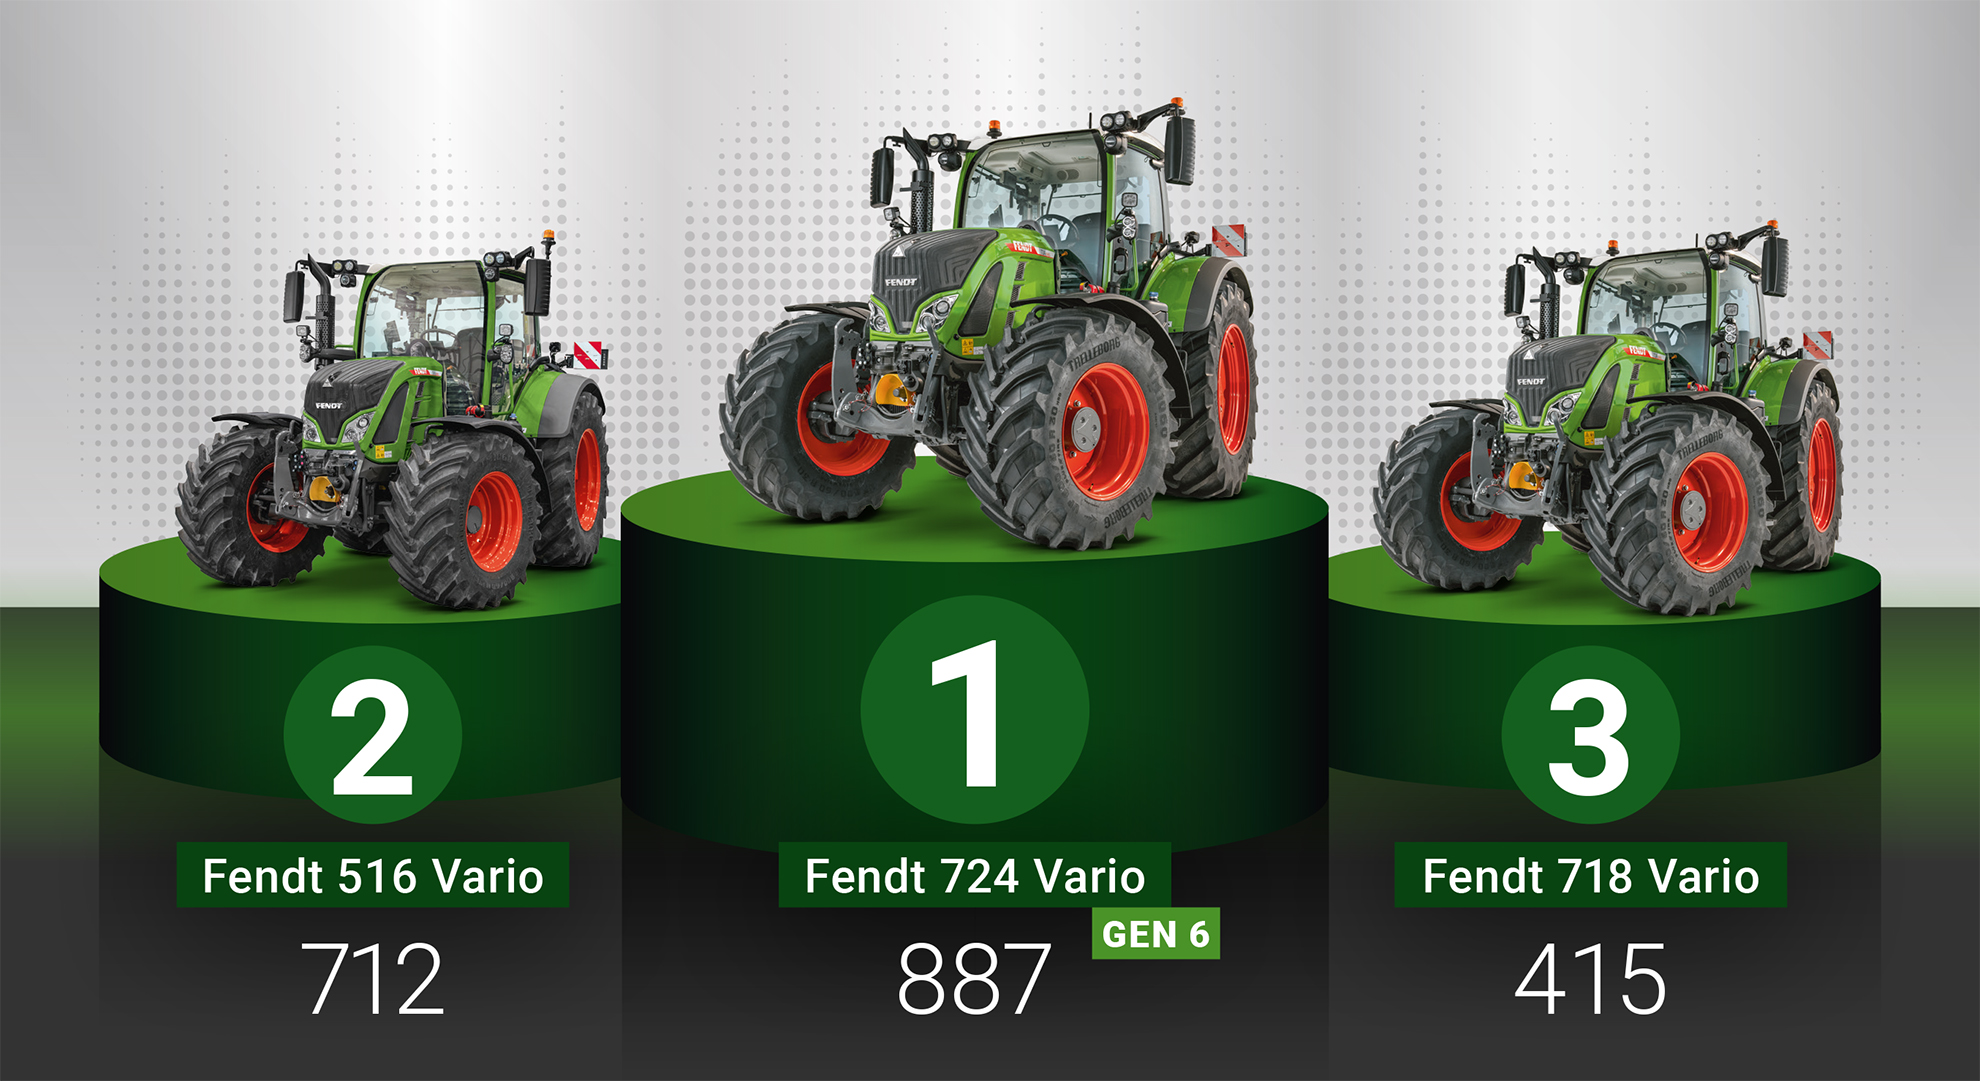 Fendt 724 Vario remains Germany's most popular tractor in 2022